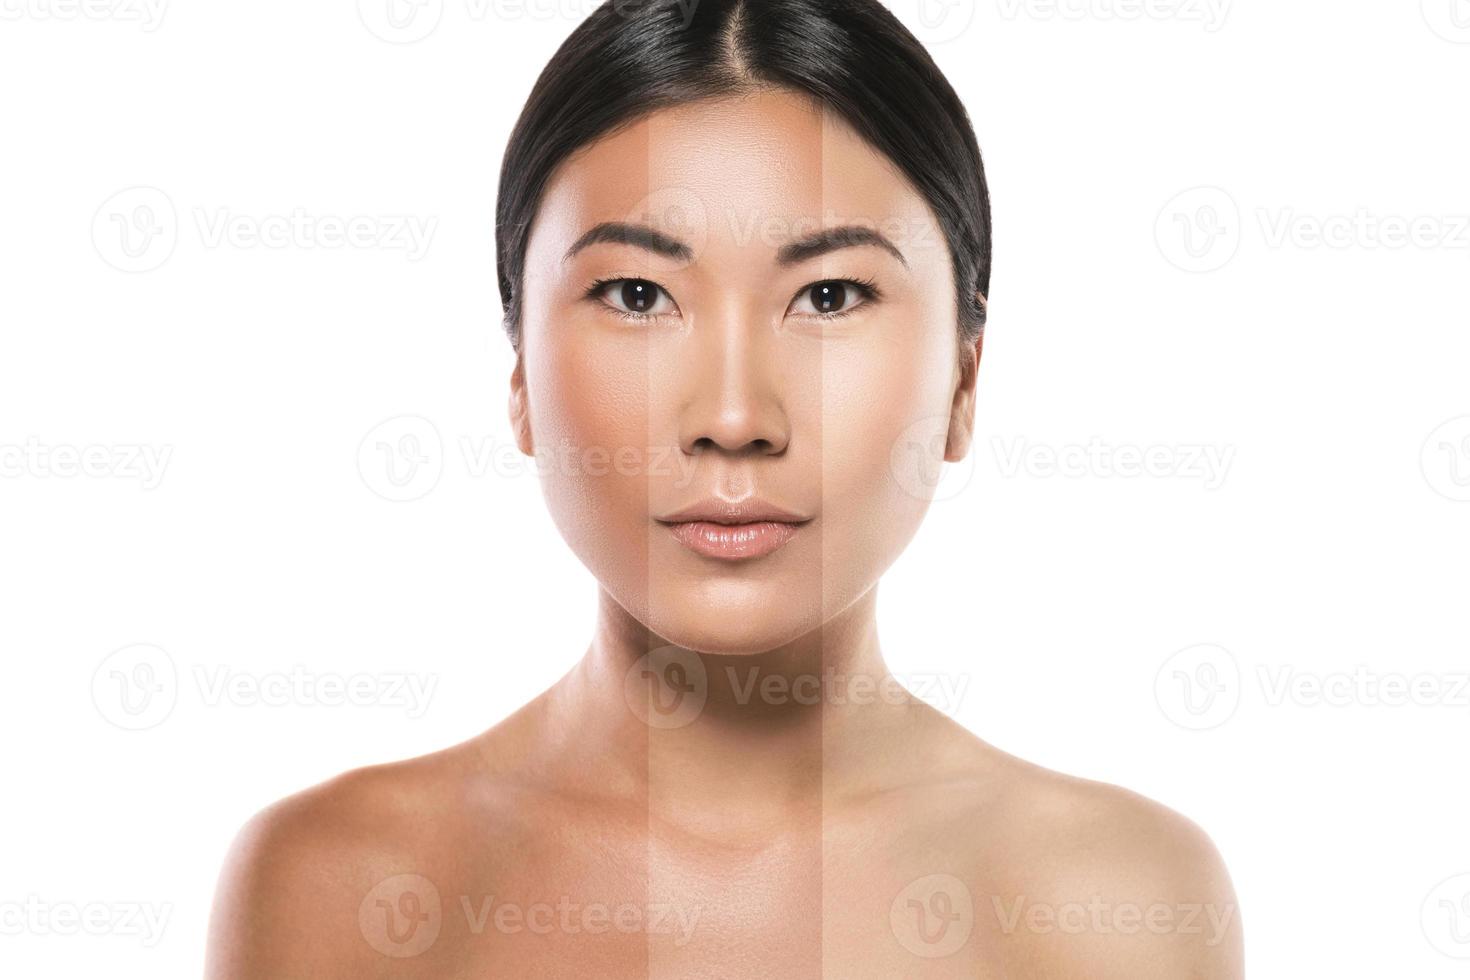 Difference in skin brightness. Concept of facial whitening or sun protection. photo